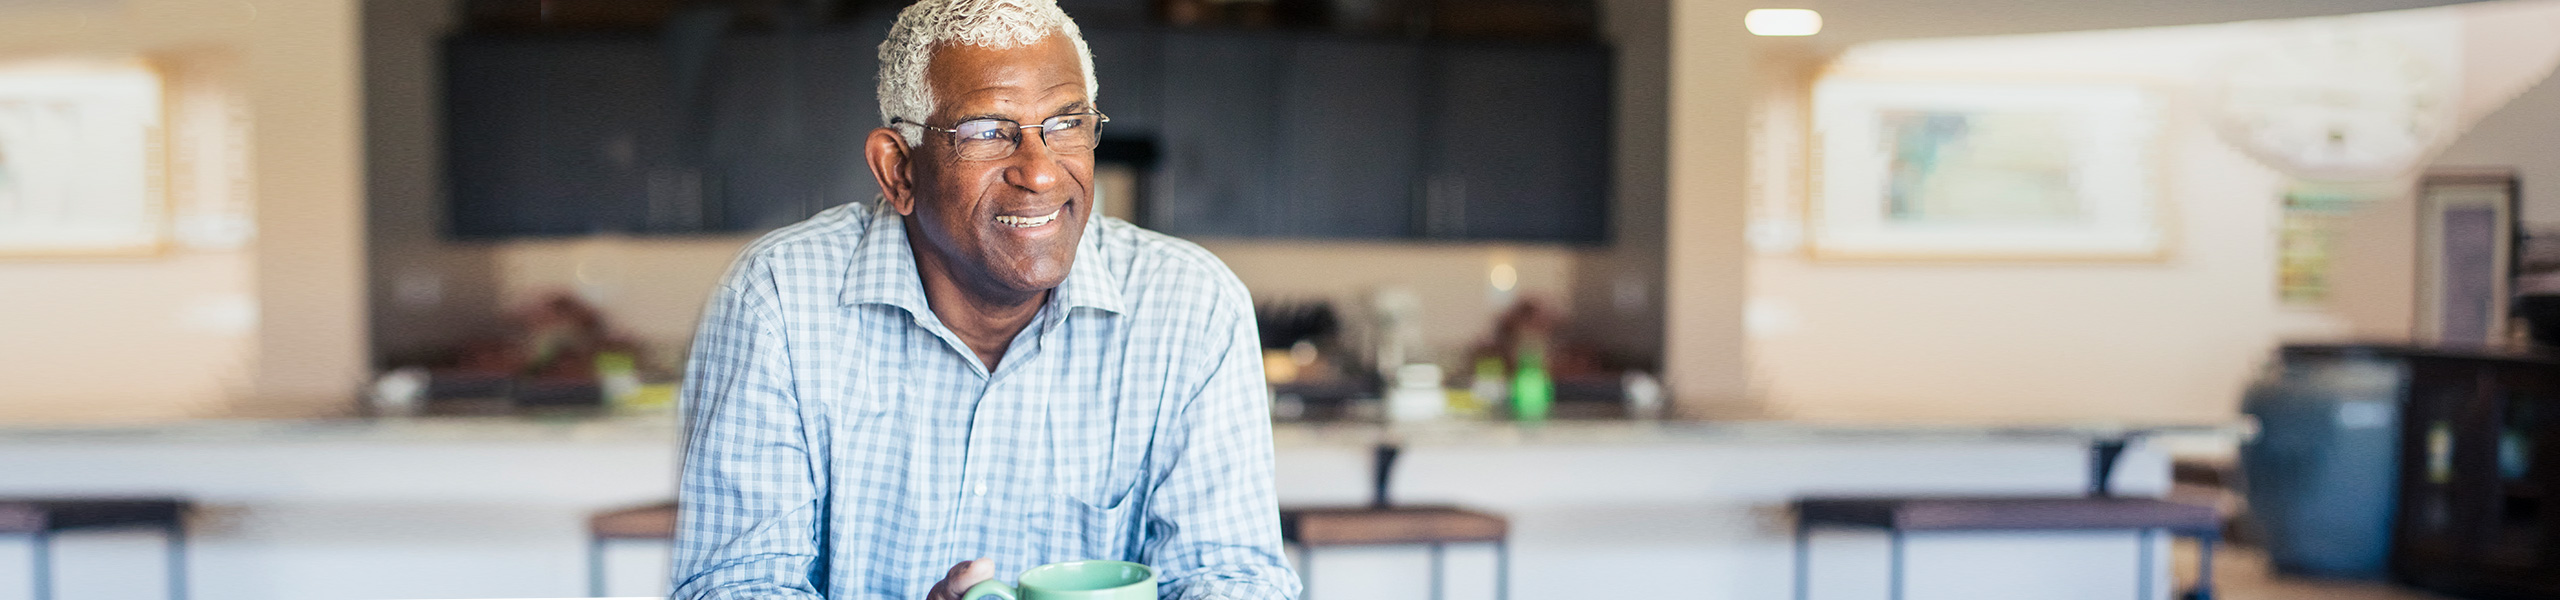 Smiling older man holds cup of coffee